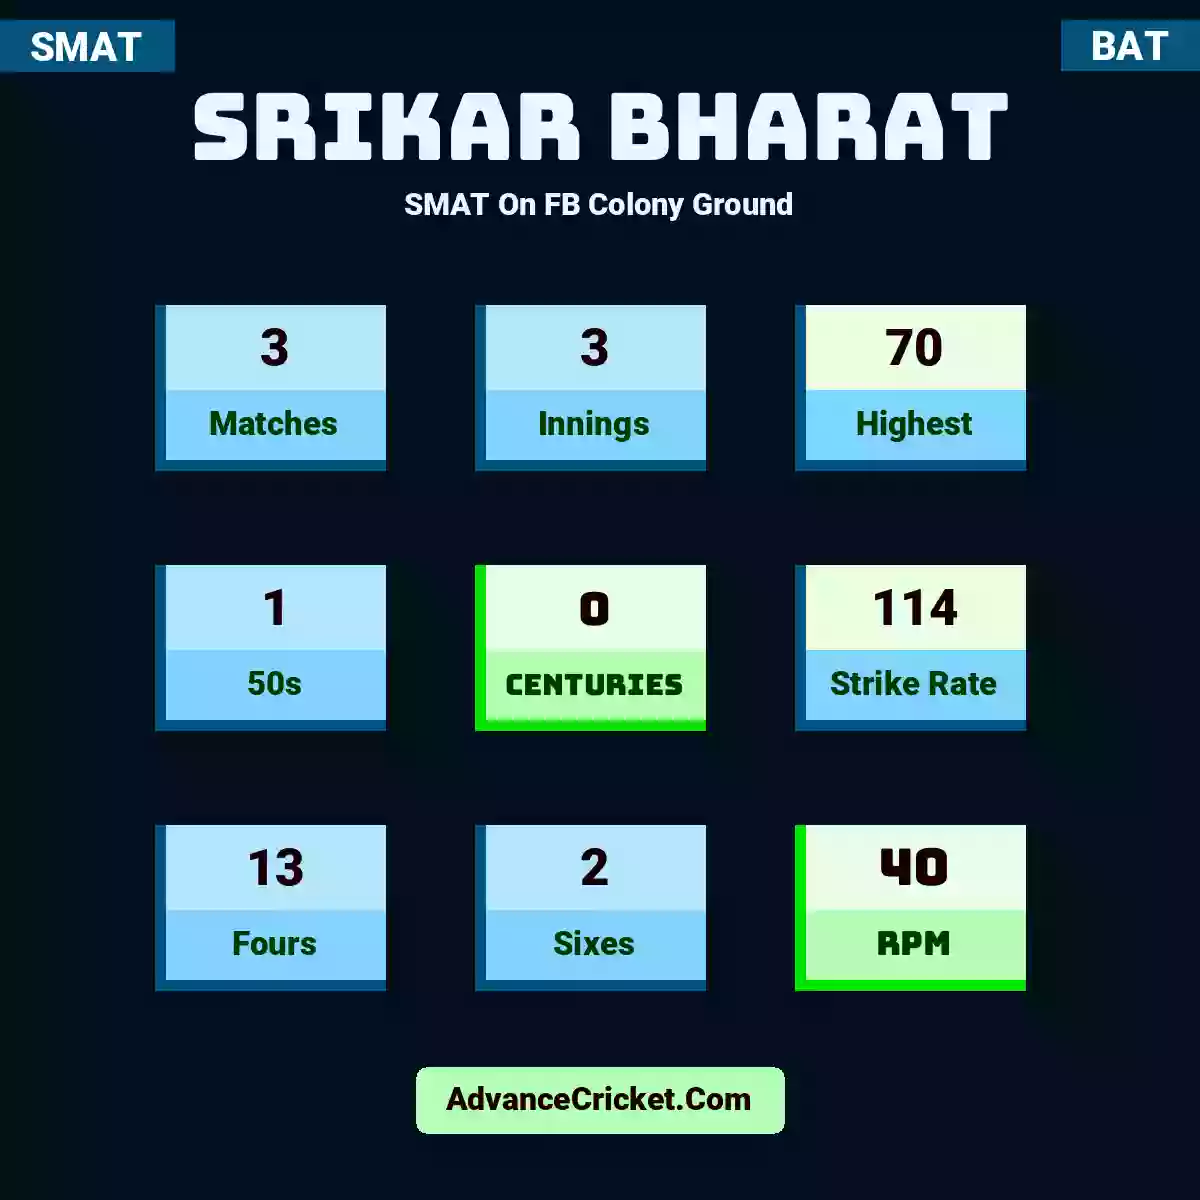 Srikar Bharat SMAT  On FB Colony Ground, Srikar Bharat played 3 matches, scored 70 runs as highest, 1 half-centuries, and 0 centuries, with a strike rate of 114. S.Bharat hit 13 fours and 2 sixes, with an RPM of 40.